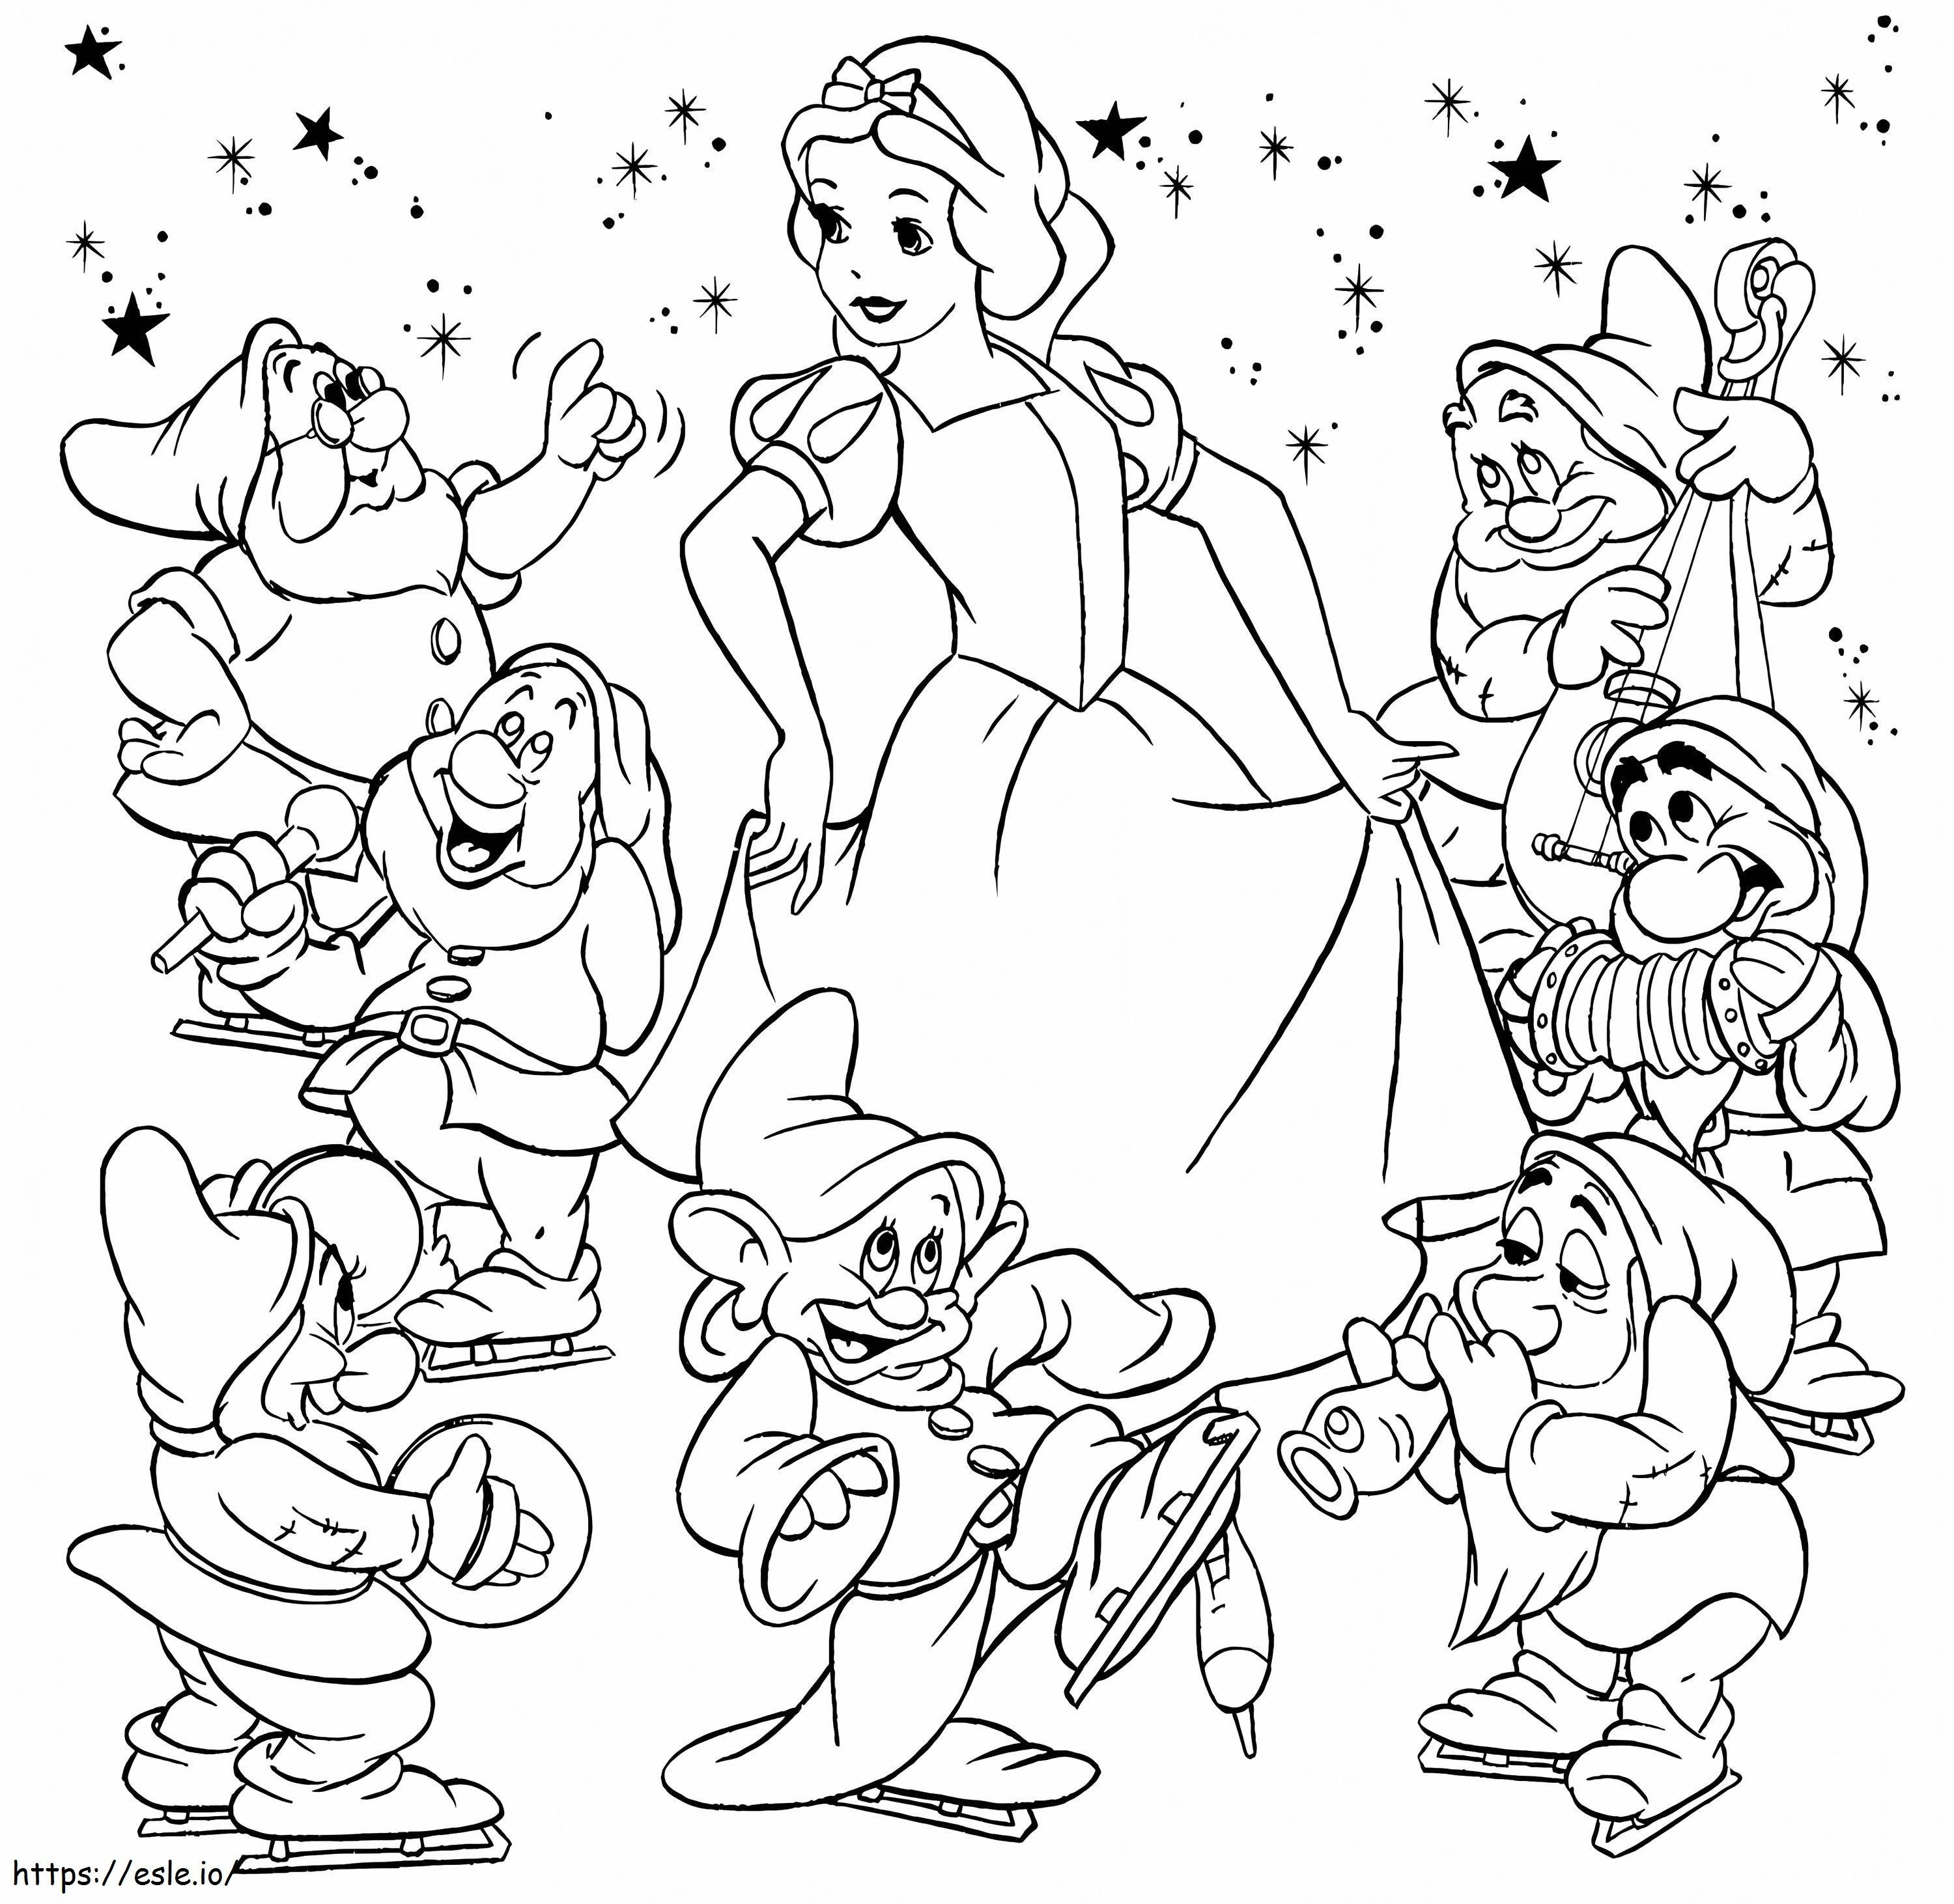 1528341360_Snow White_Coloring_Pages_From_Brooklyn A4 värityskuva